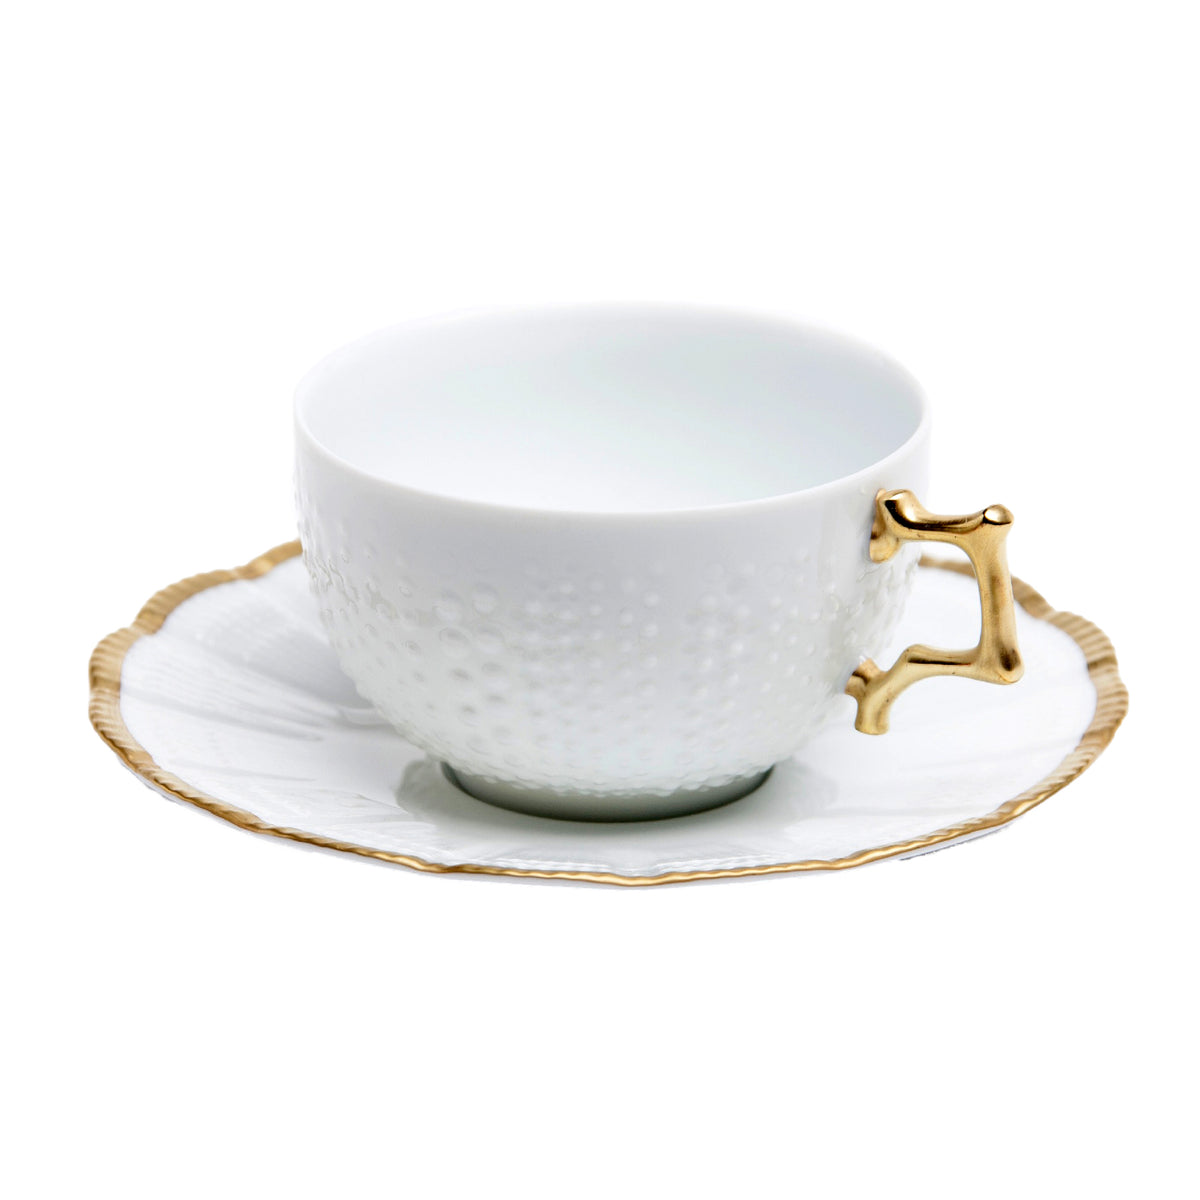 Corail Or Porcelain Tea Cup and Saucer